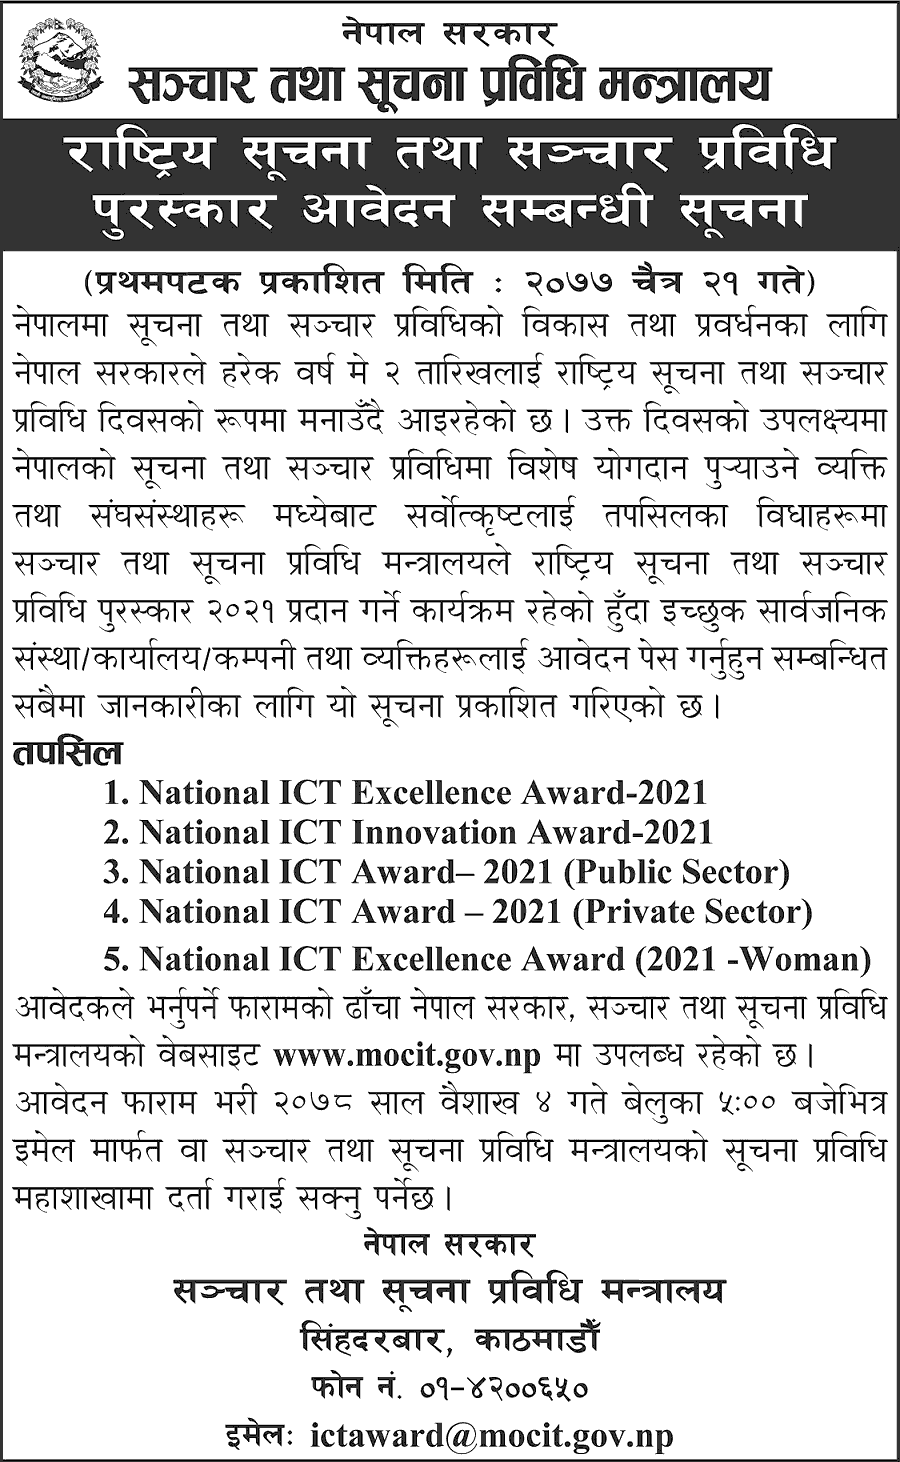 MoCIT Call to Apply for National ICT Award 2021